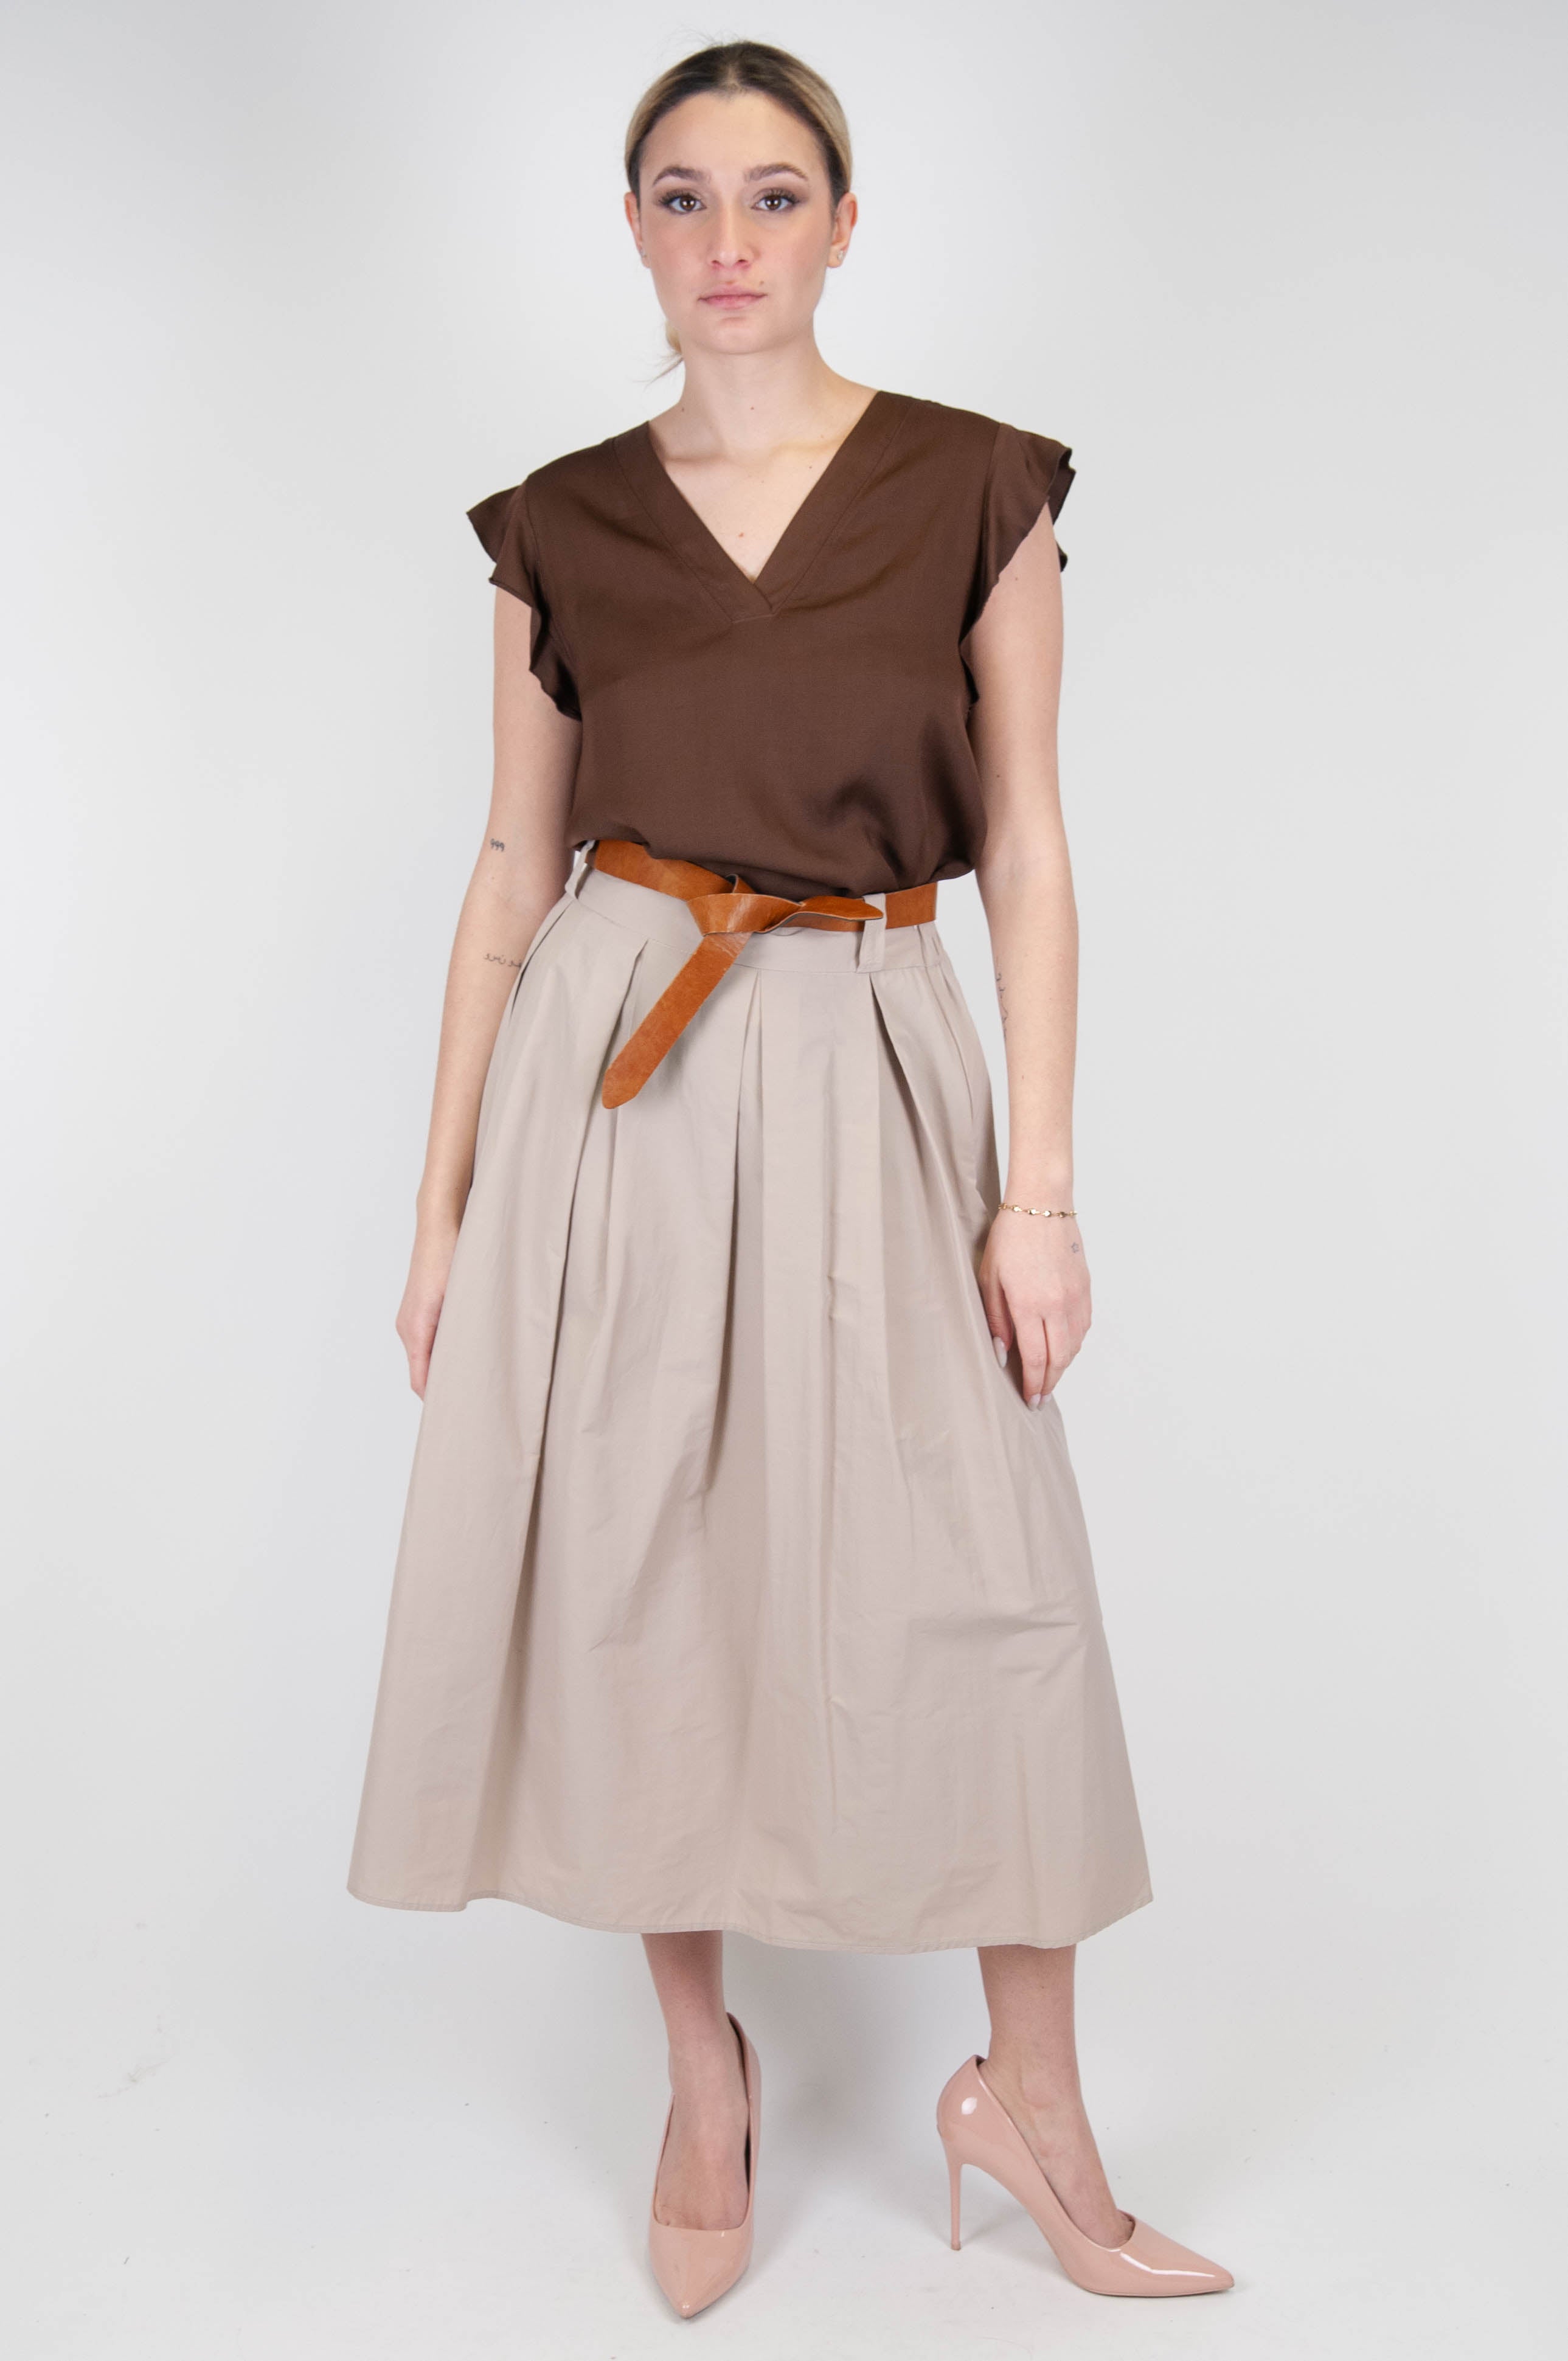 Haveone - Skirt with pleats and elastic on the back